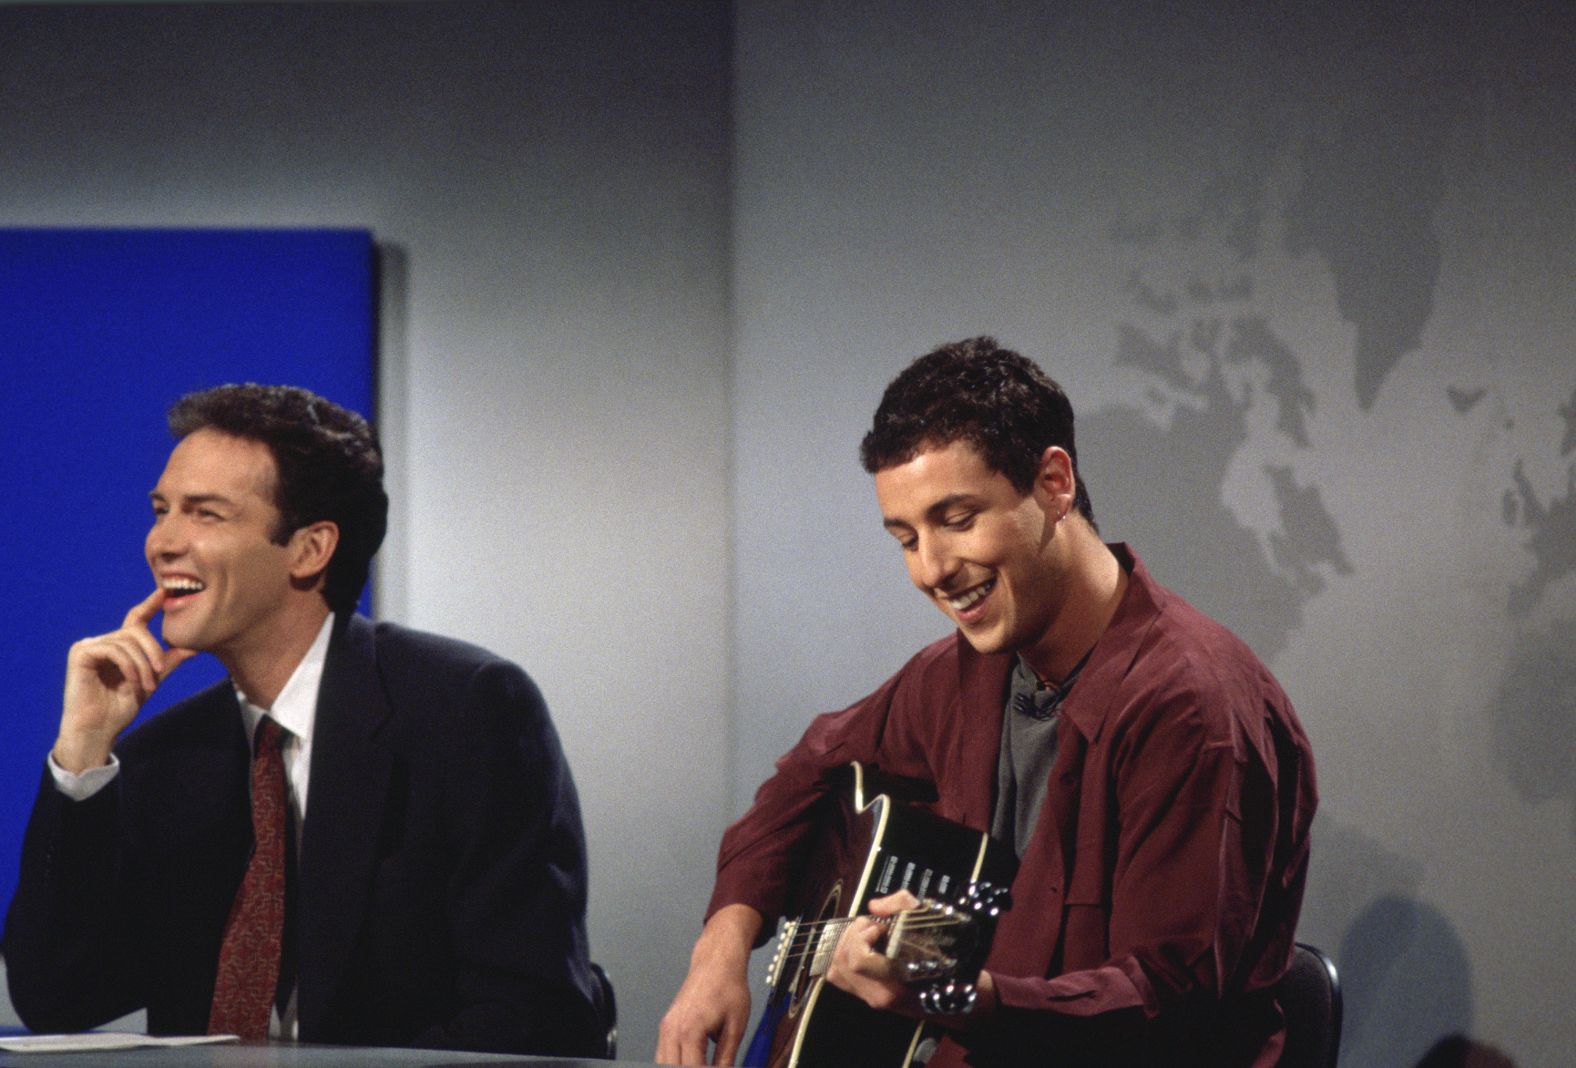 Sandler, next to Norm Macdonald, plays "The Chanukah Song" during an "SNL" episode in 1994. The comedic song, which talks about Hanukkah and famous people who are (and are not) Jewish, would later go on to be released as a single. It was certified gold.